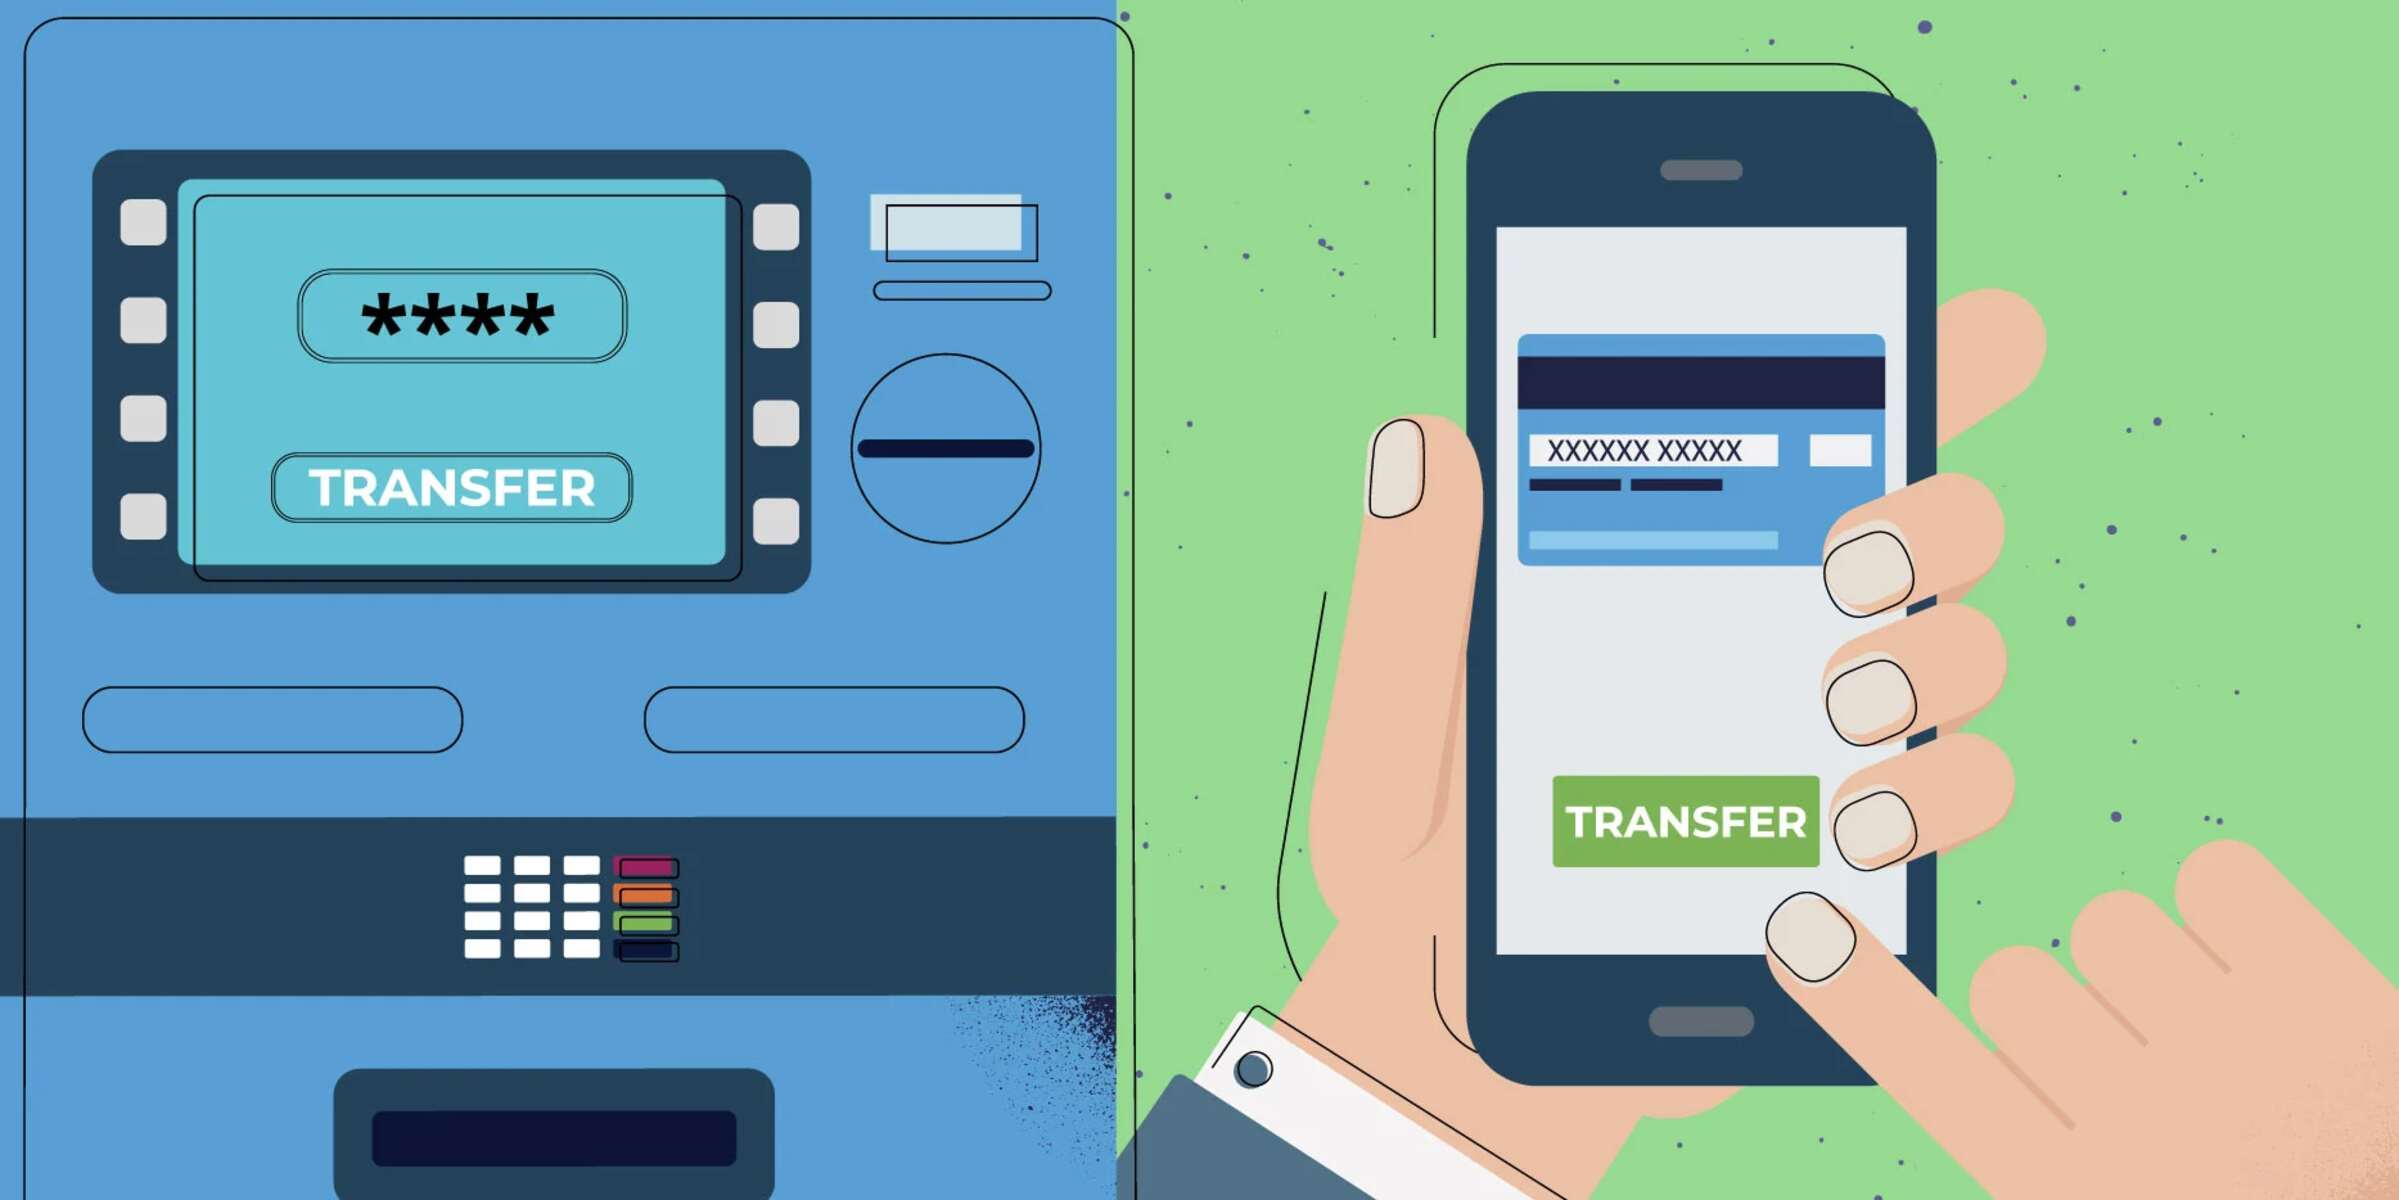 How To Flash A Money Transfer To A Bank Account